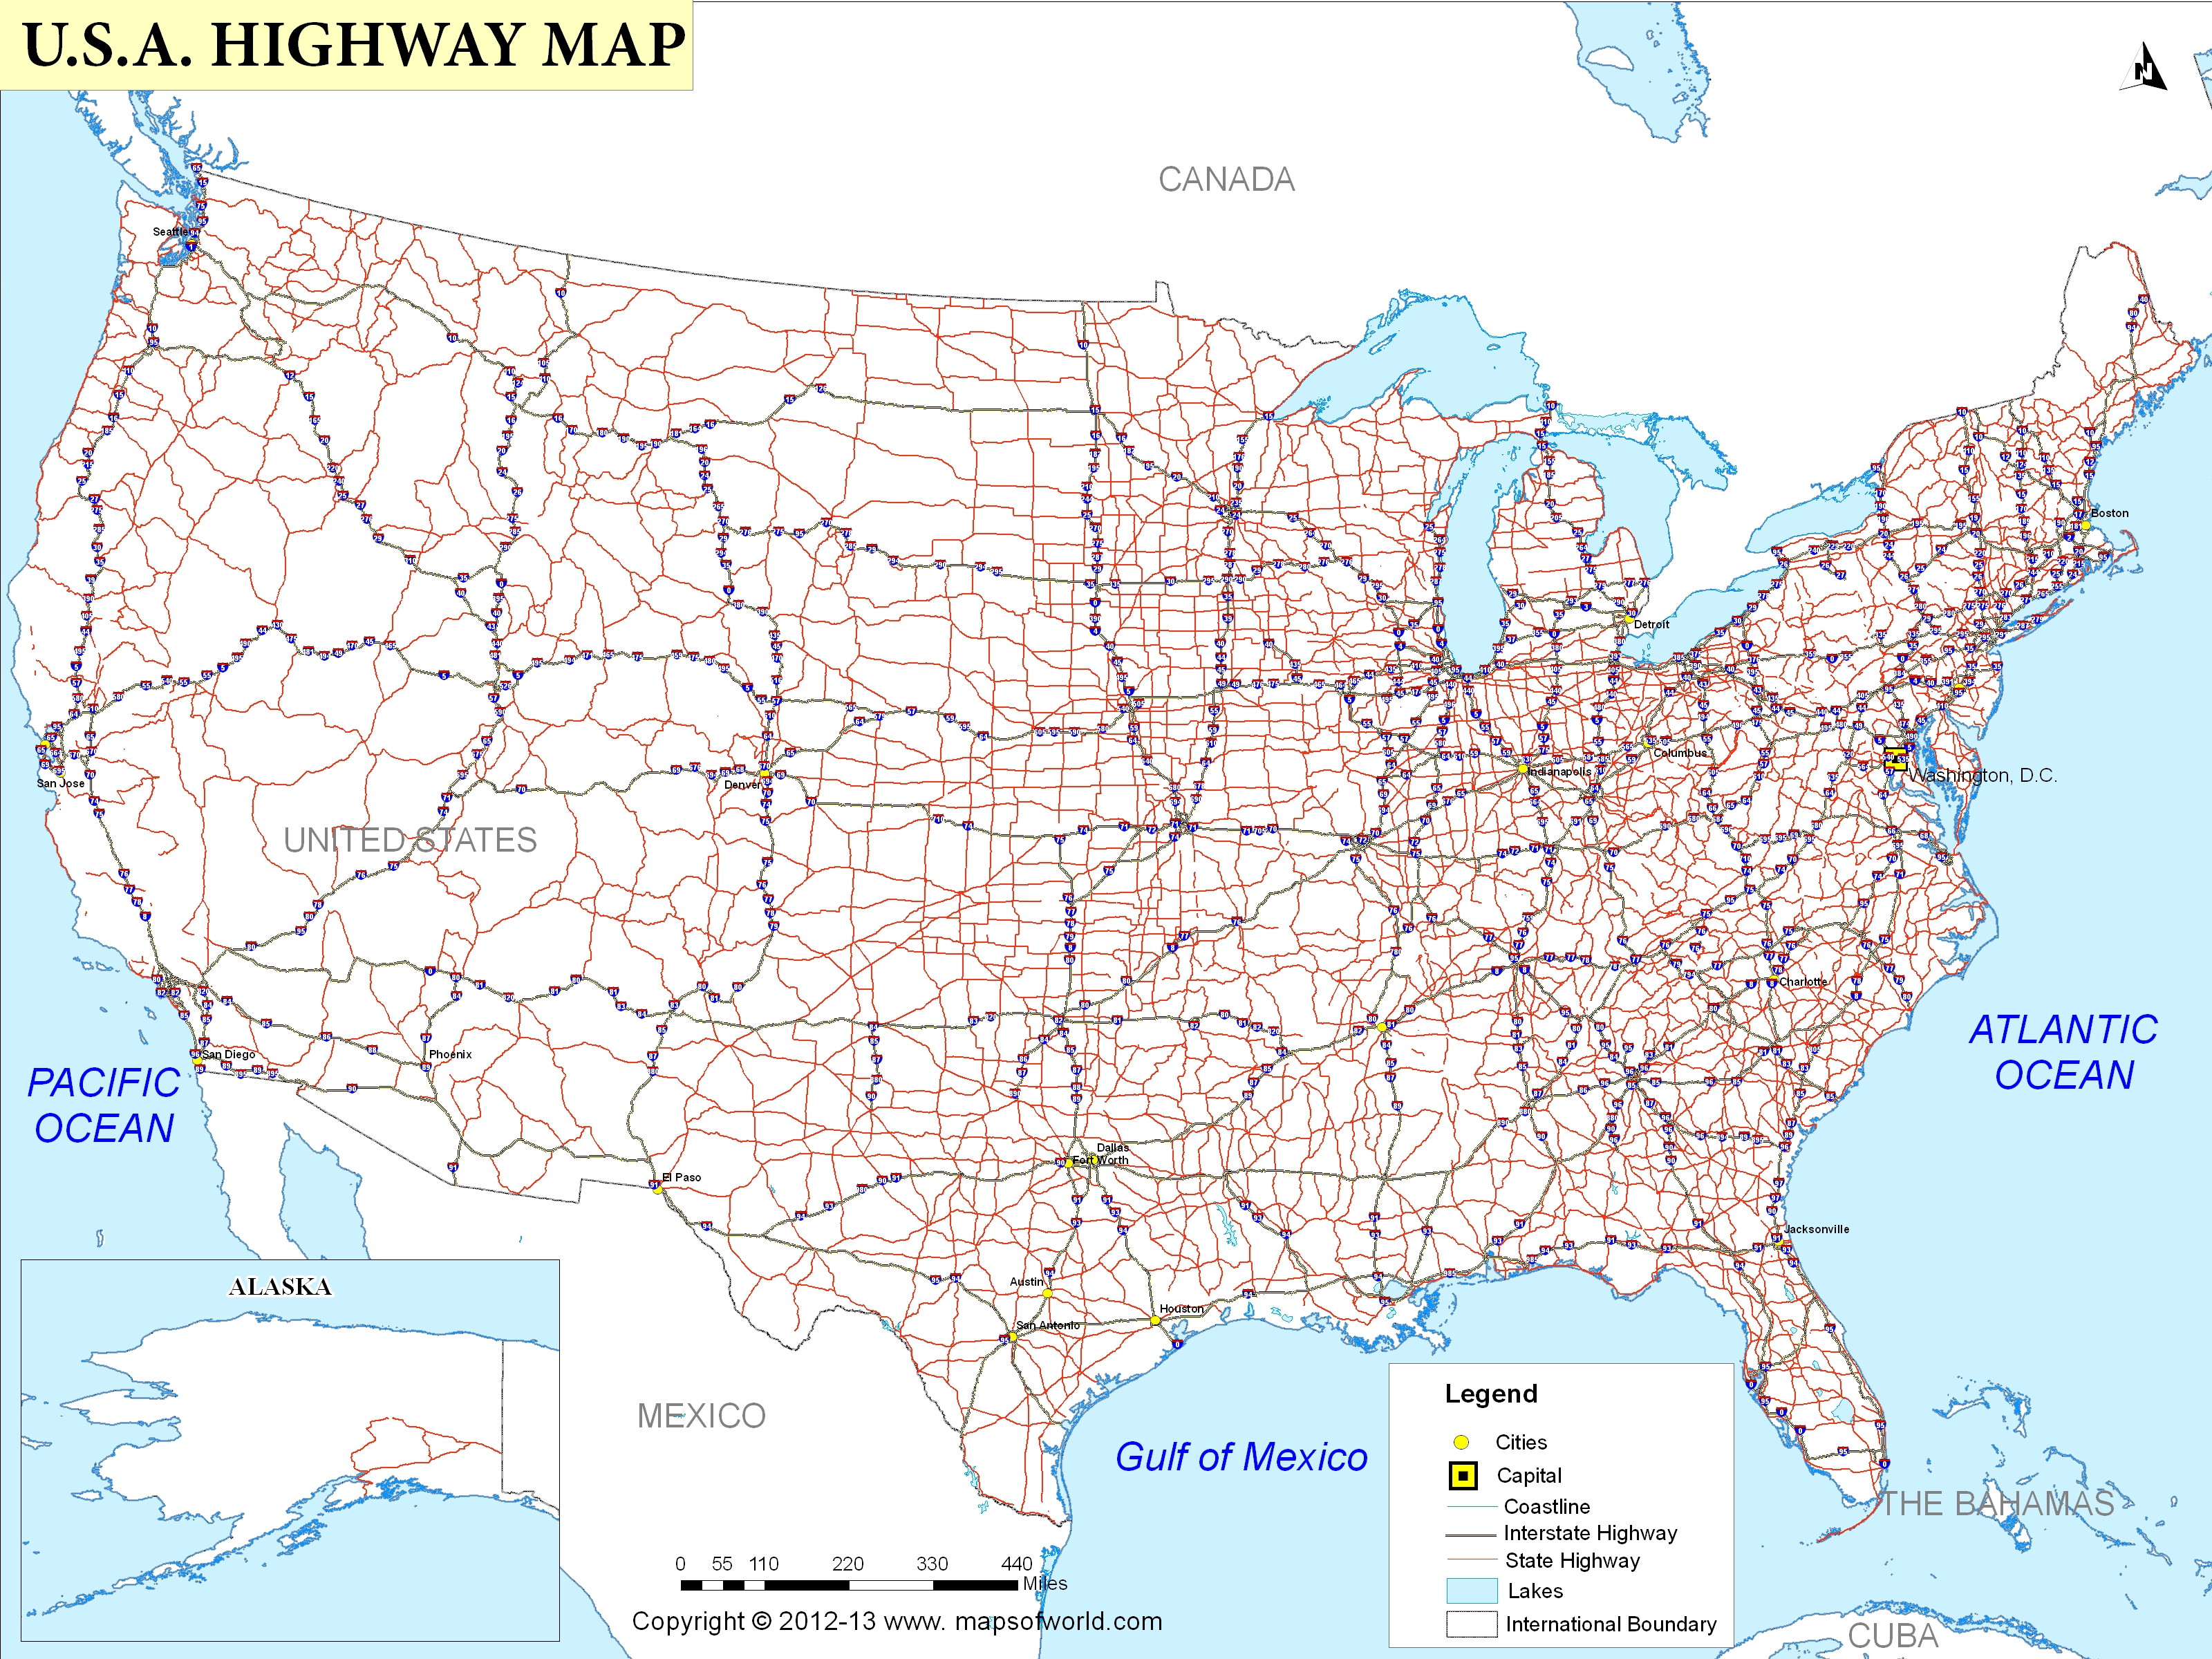 6-best-images-of-united-states-highway-map-printable-united-states-united-states-road-map-usa